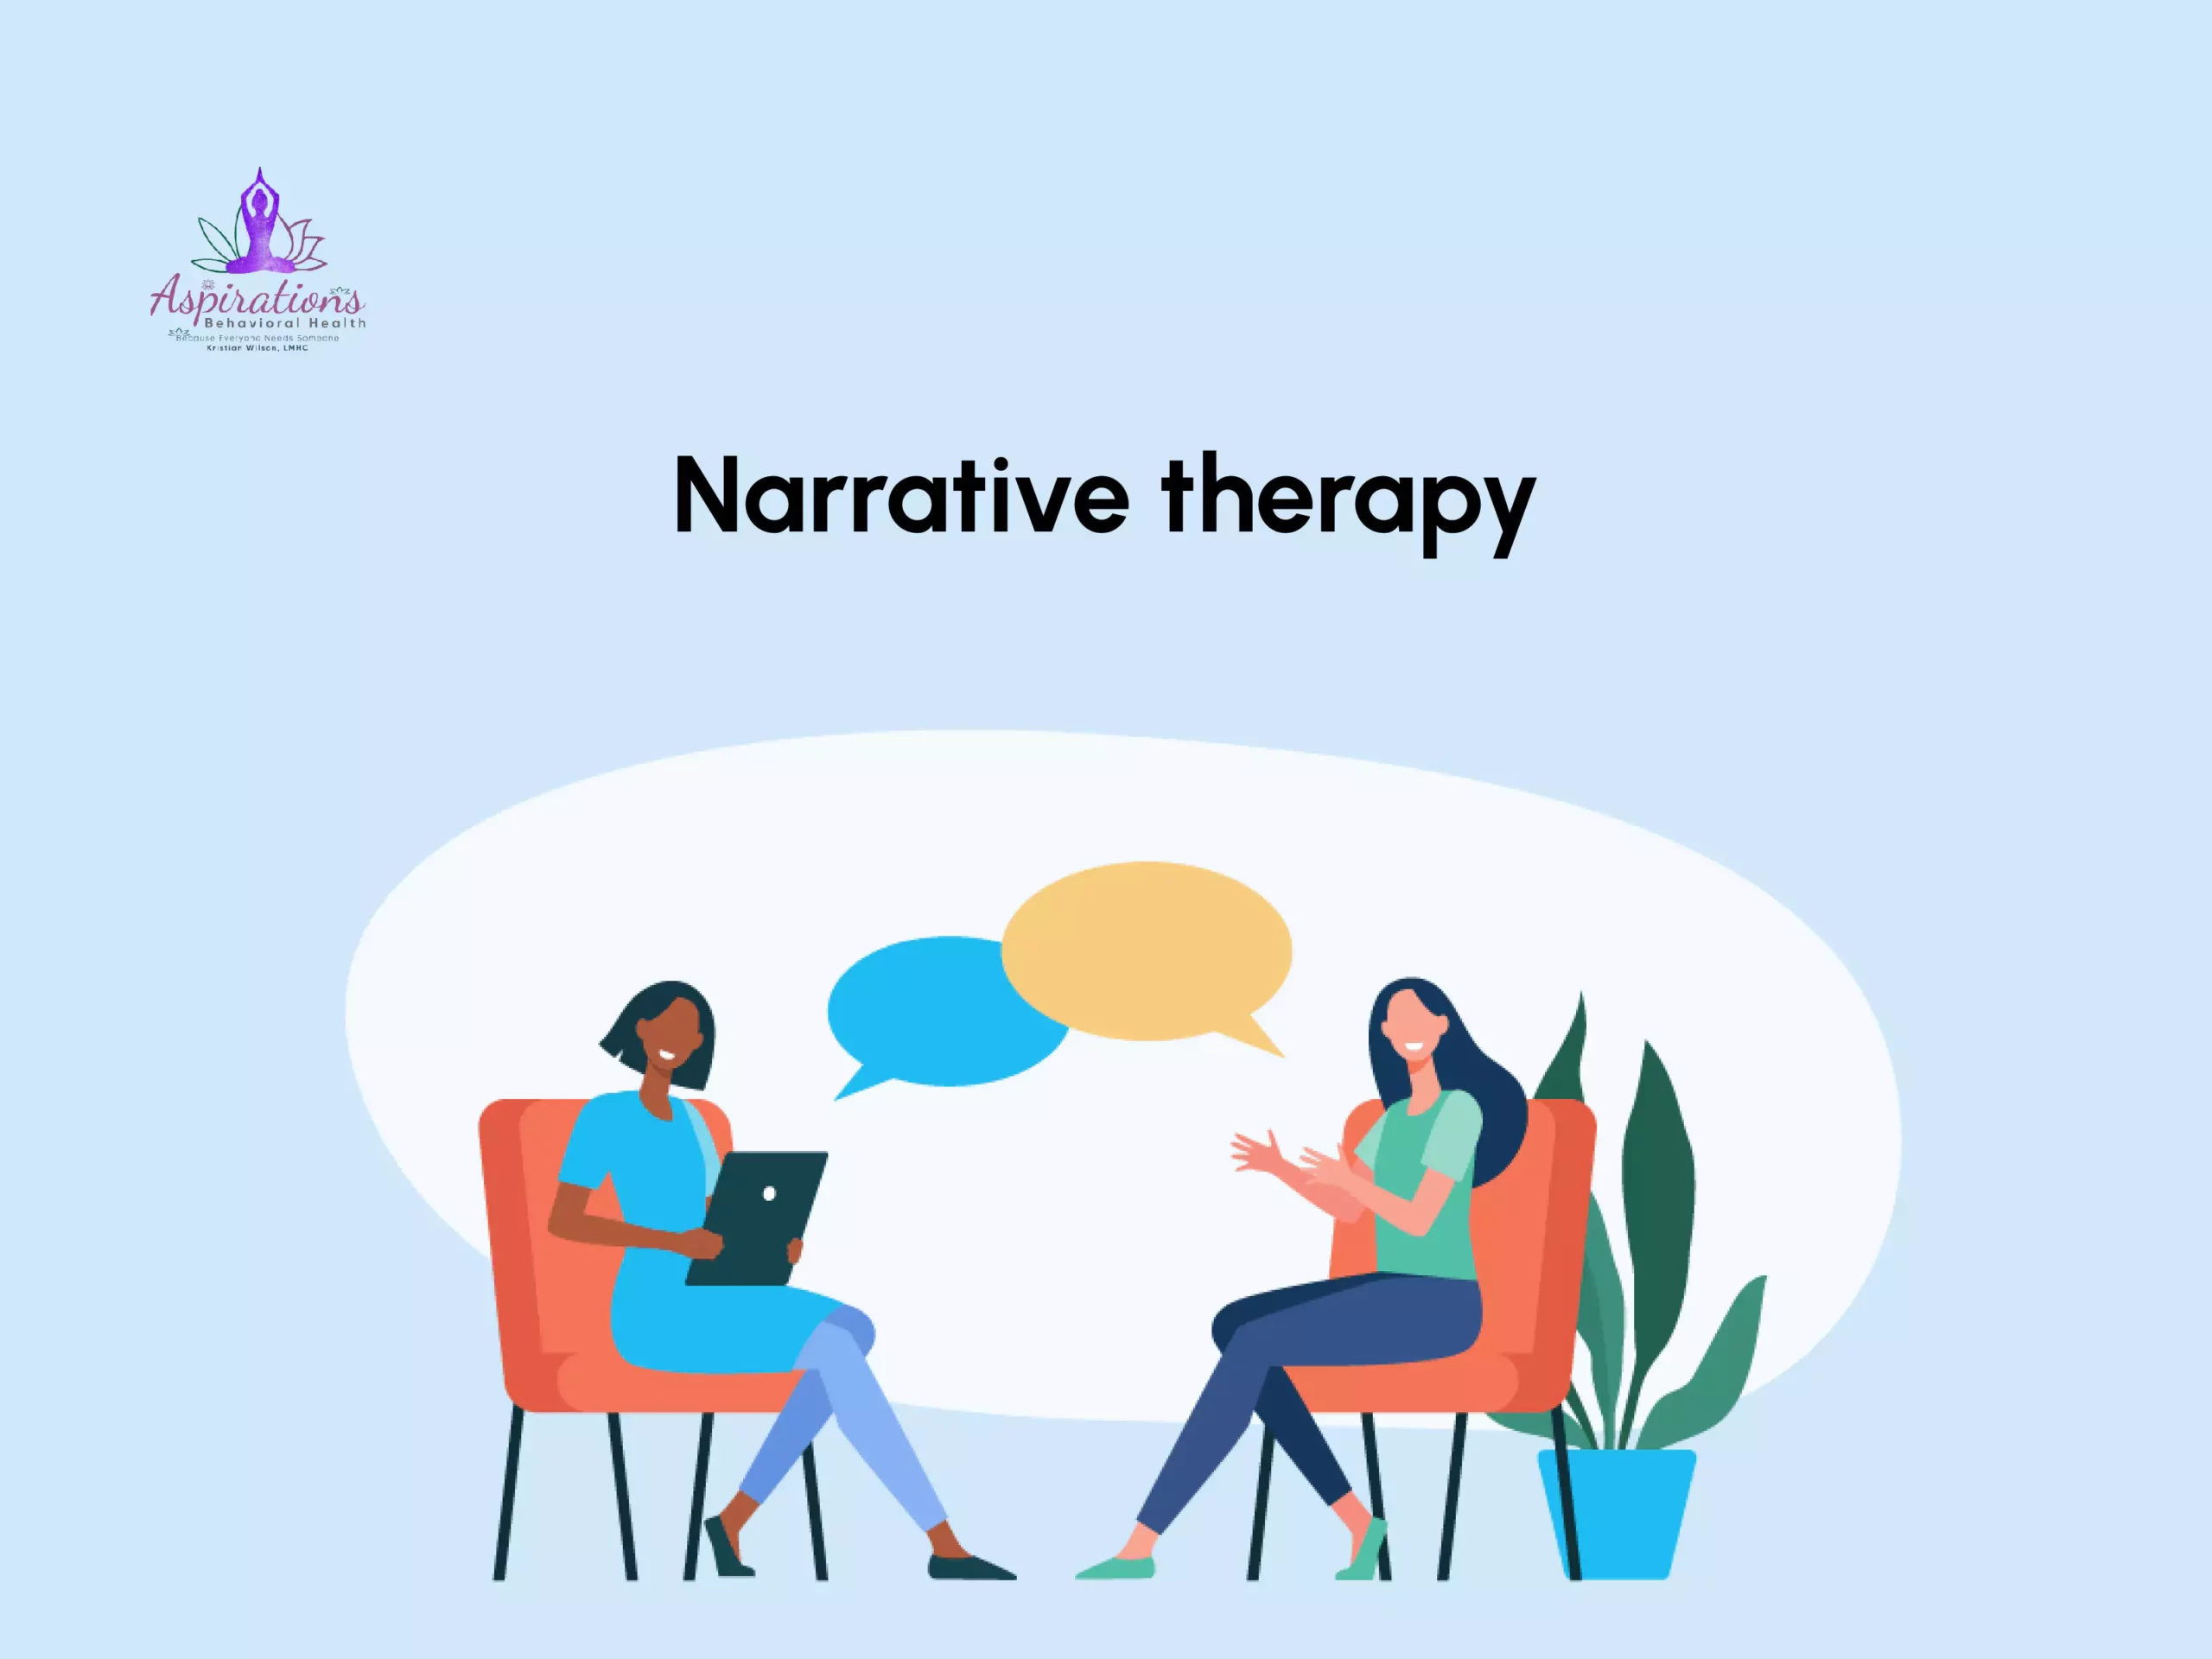 Narrative therapy